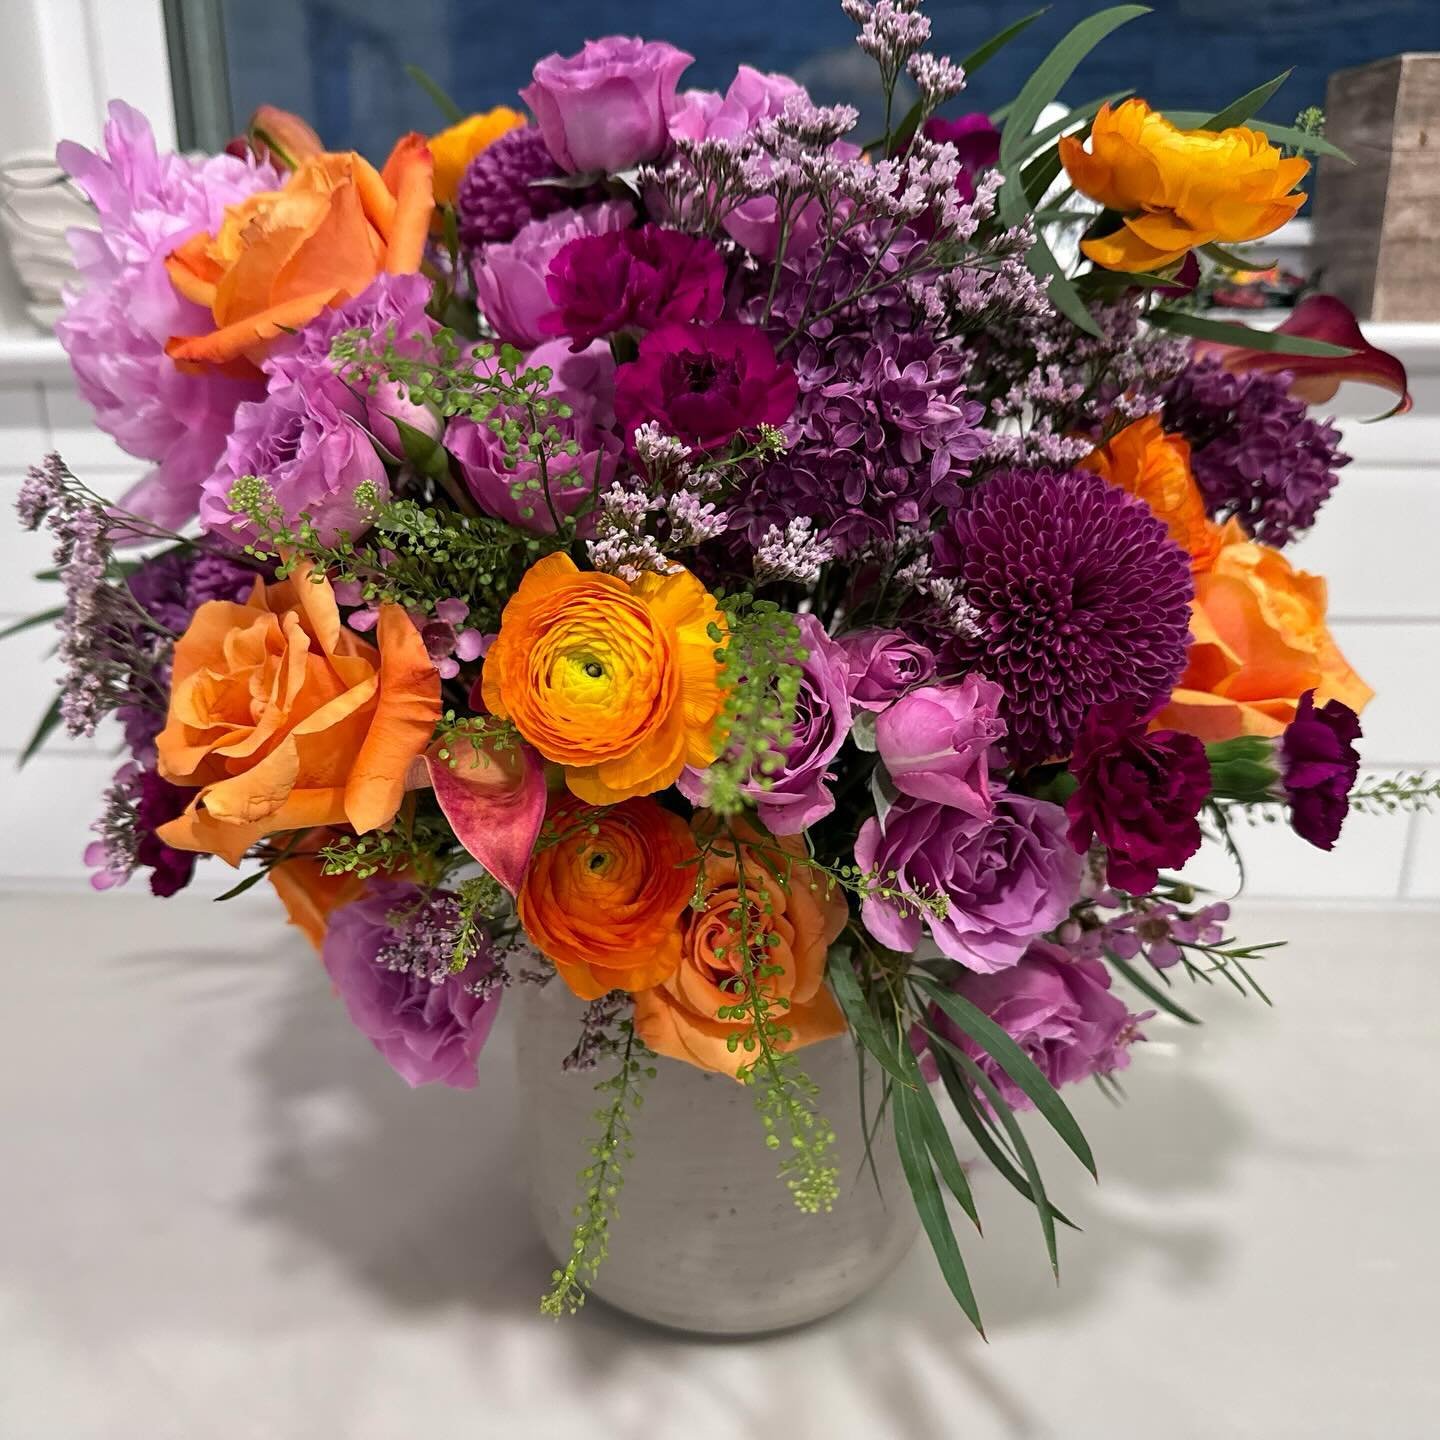 I had the best day today. I woke up to house full of fragrant flowers and spent hours processing, smelling, admiring, arranging, and rearranging the most beautiful blooms for three Mother&rsquo;s Day orders. I think I outdid myself if I&rsquo;m being